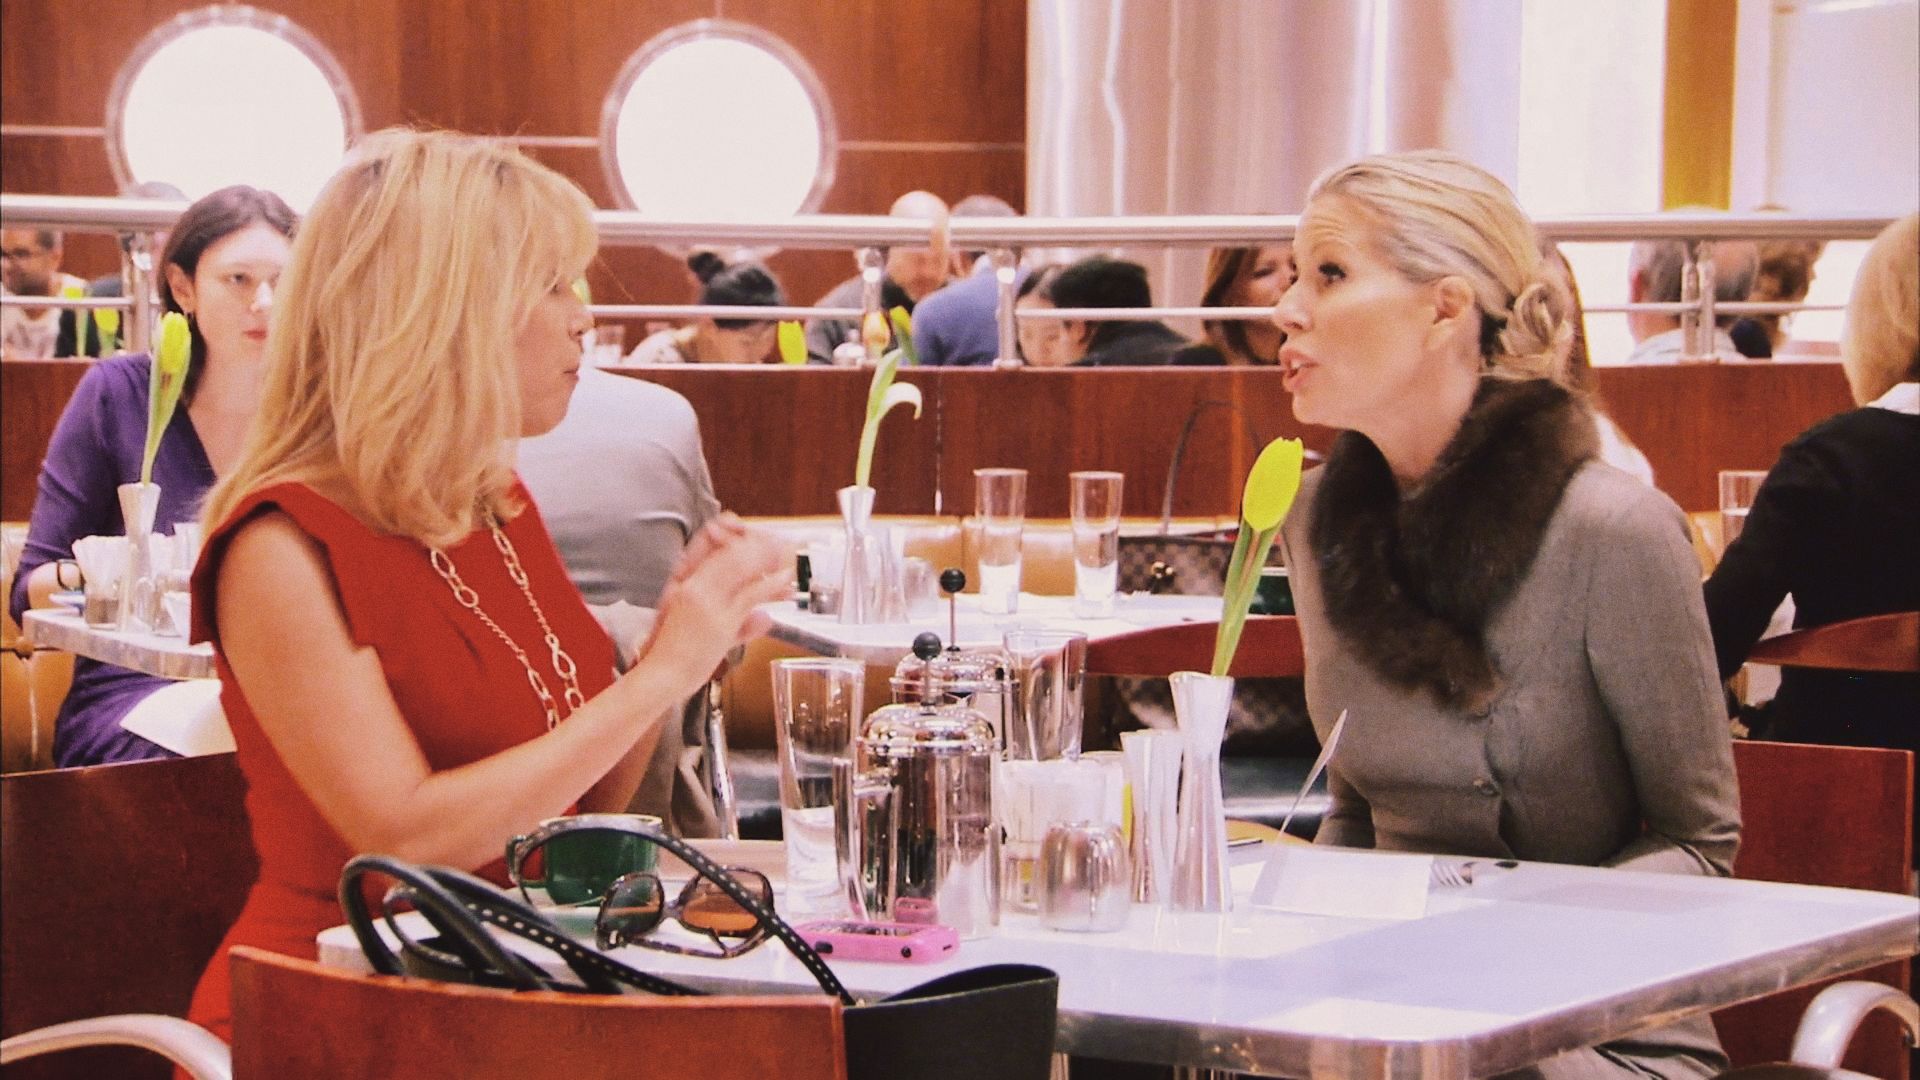 RHONY The Real Housewives of New York City S05E17 saison 5 épisode 17 Don't Make Room for Daddy